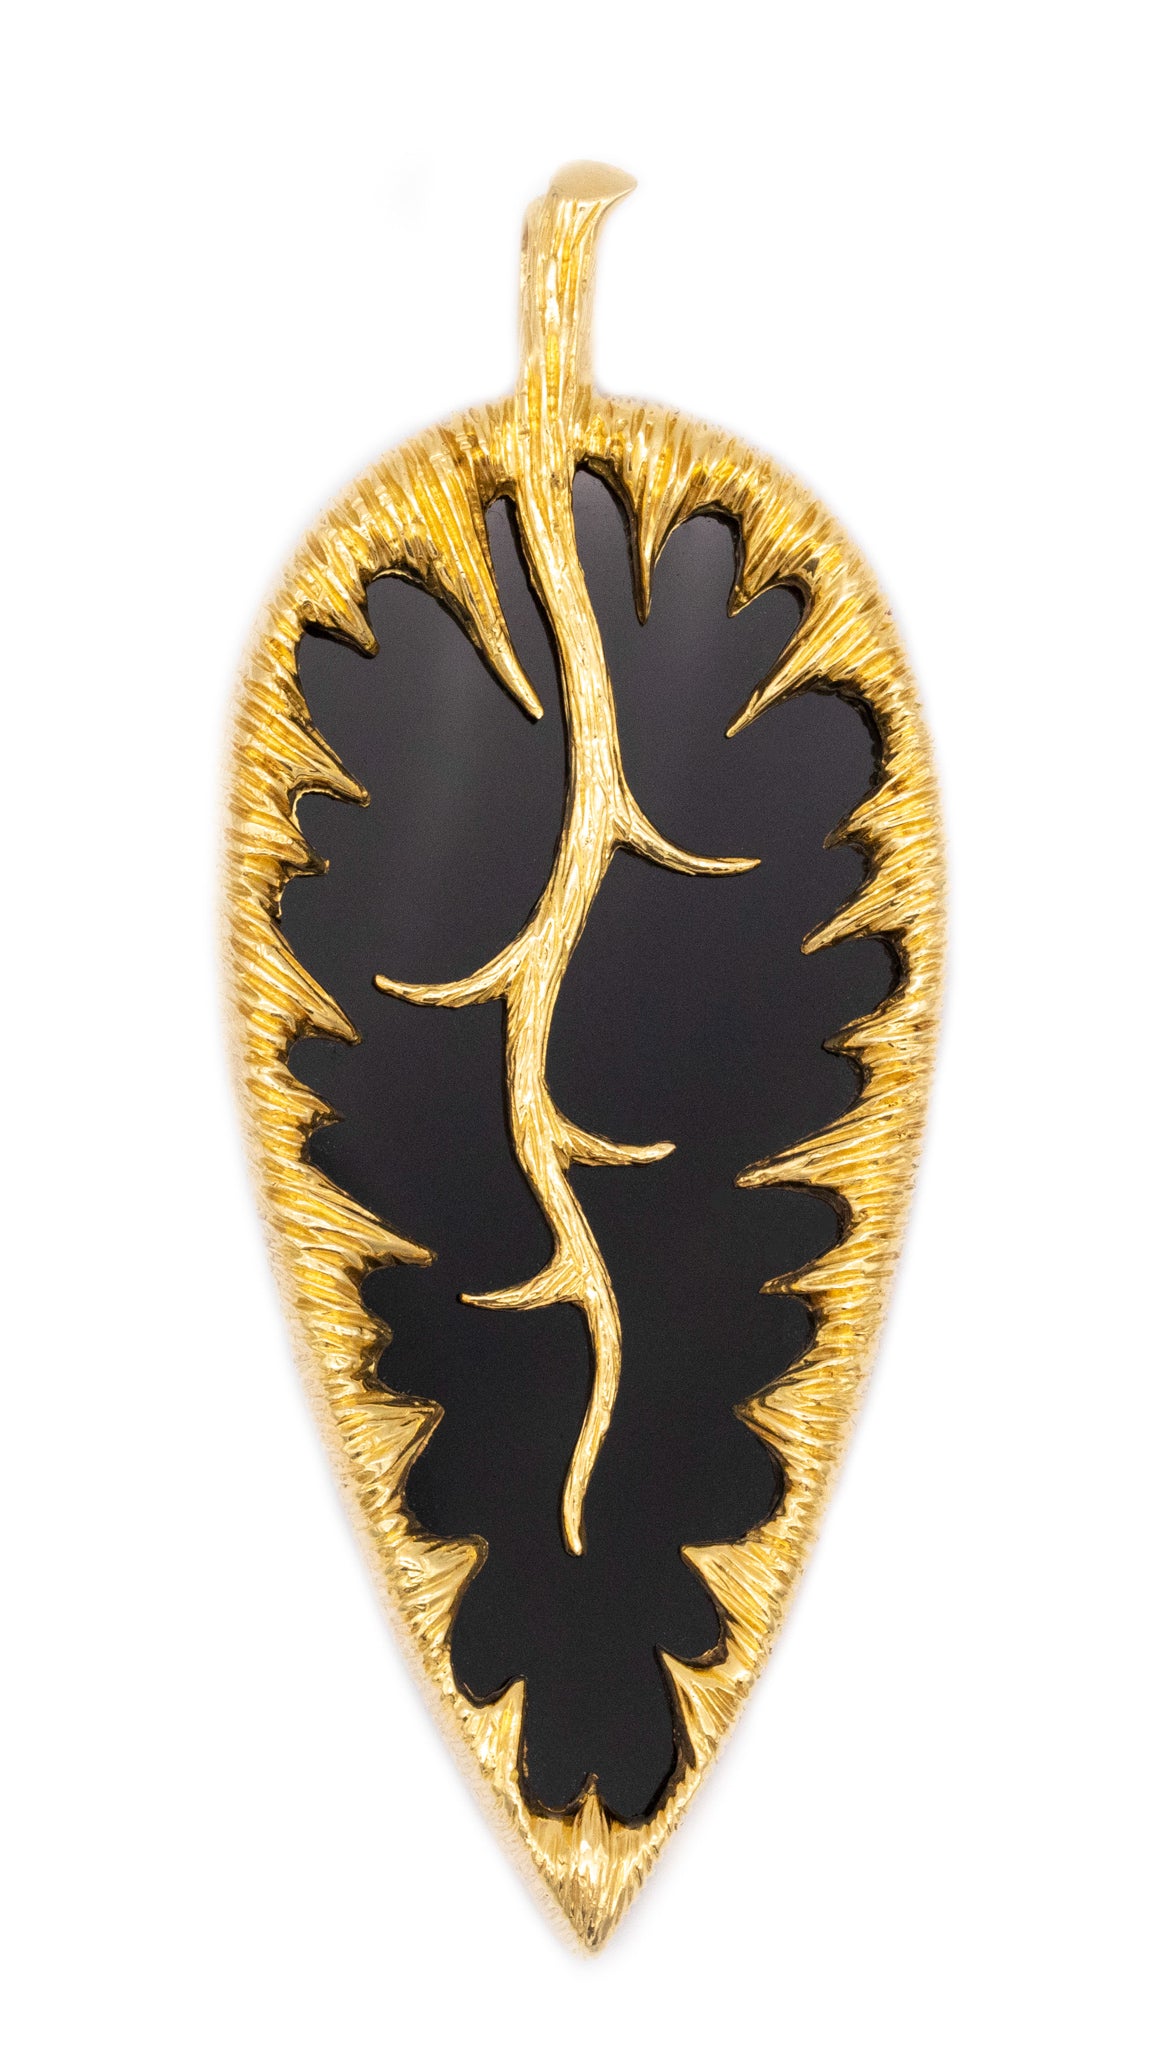 KUTCHINSKY 1973 LONDON 18 KT ABSTRACT PENDANT WITH CARVED ONYX